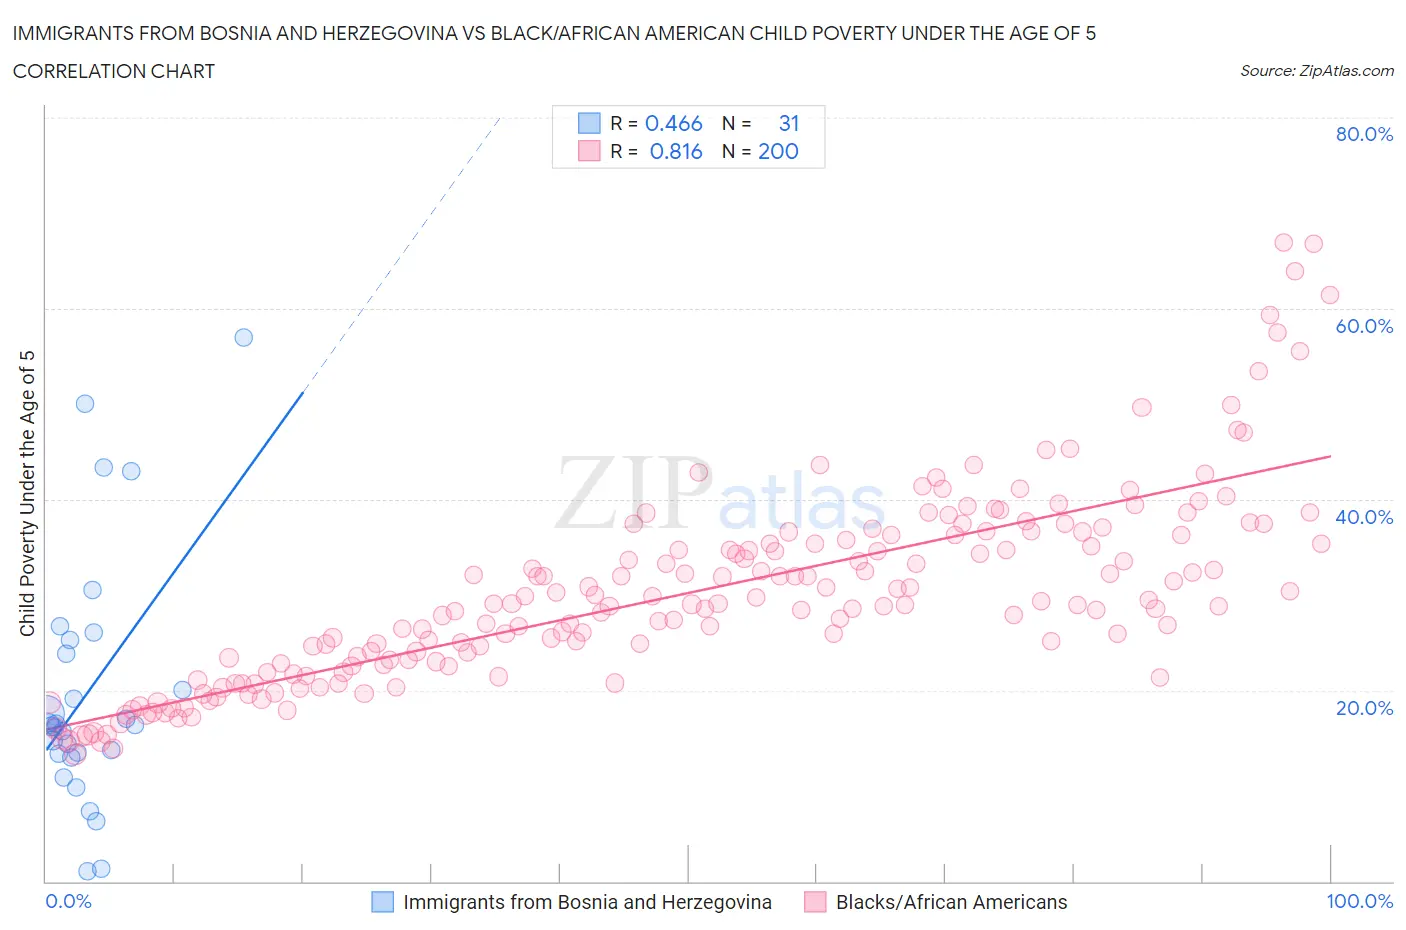 Immigrants from Bosnia and Herzegovina vs Black/African American Child Poverty Under the Age of 5